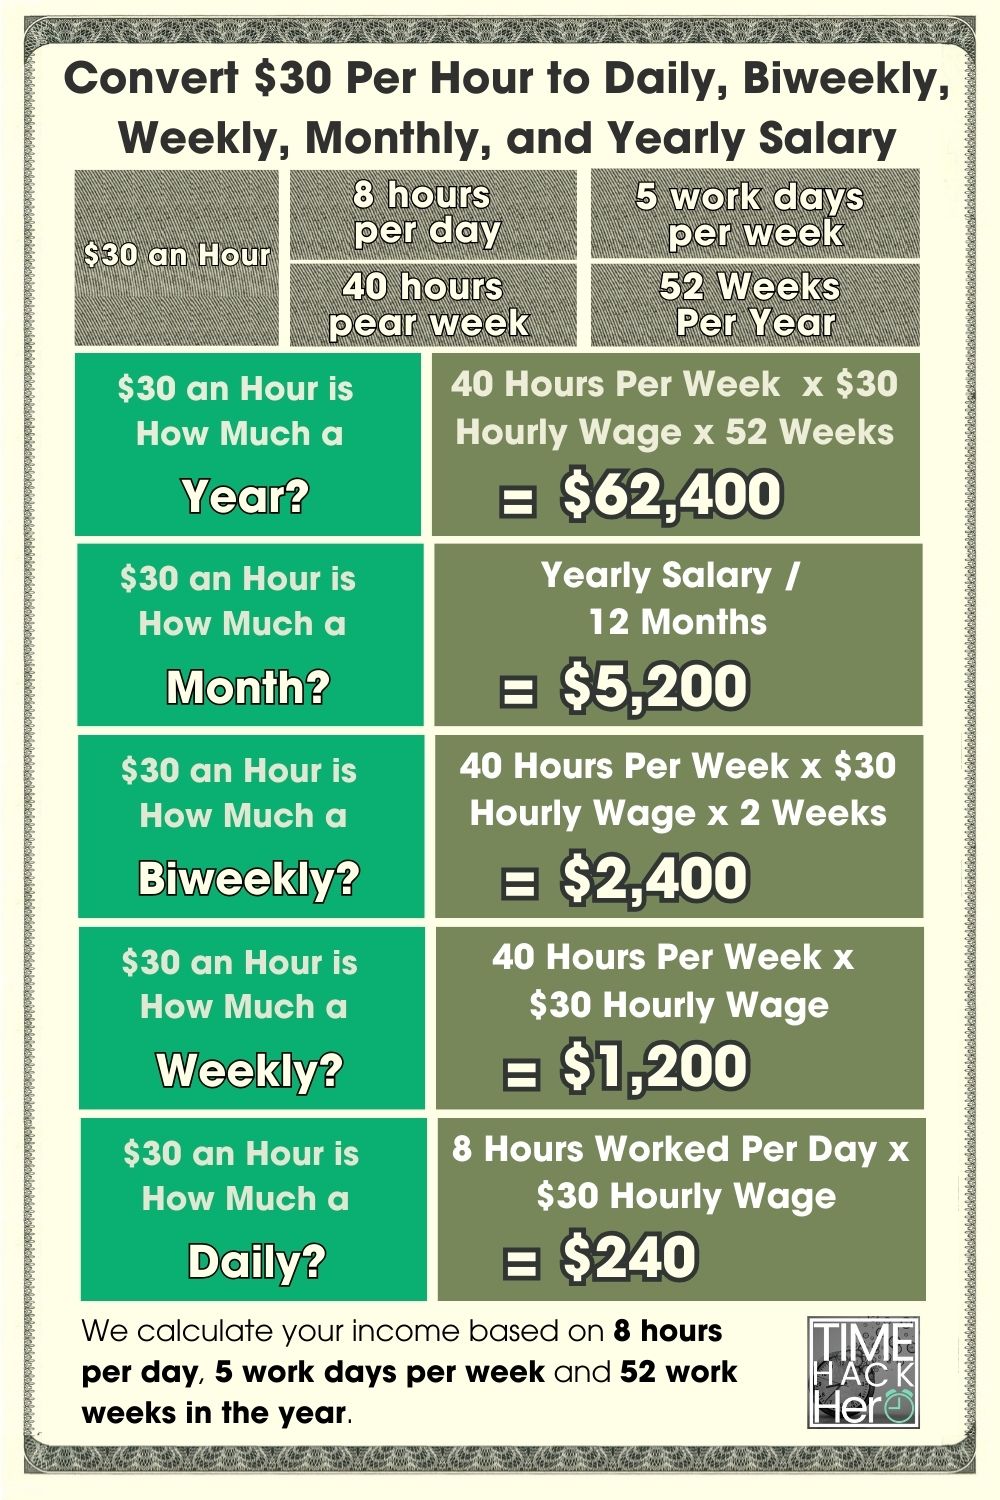 Convert $30 Per Hour to Daily, Biweekly, Weekly, Monthly, and Yearly Salary